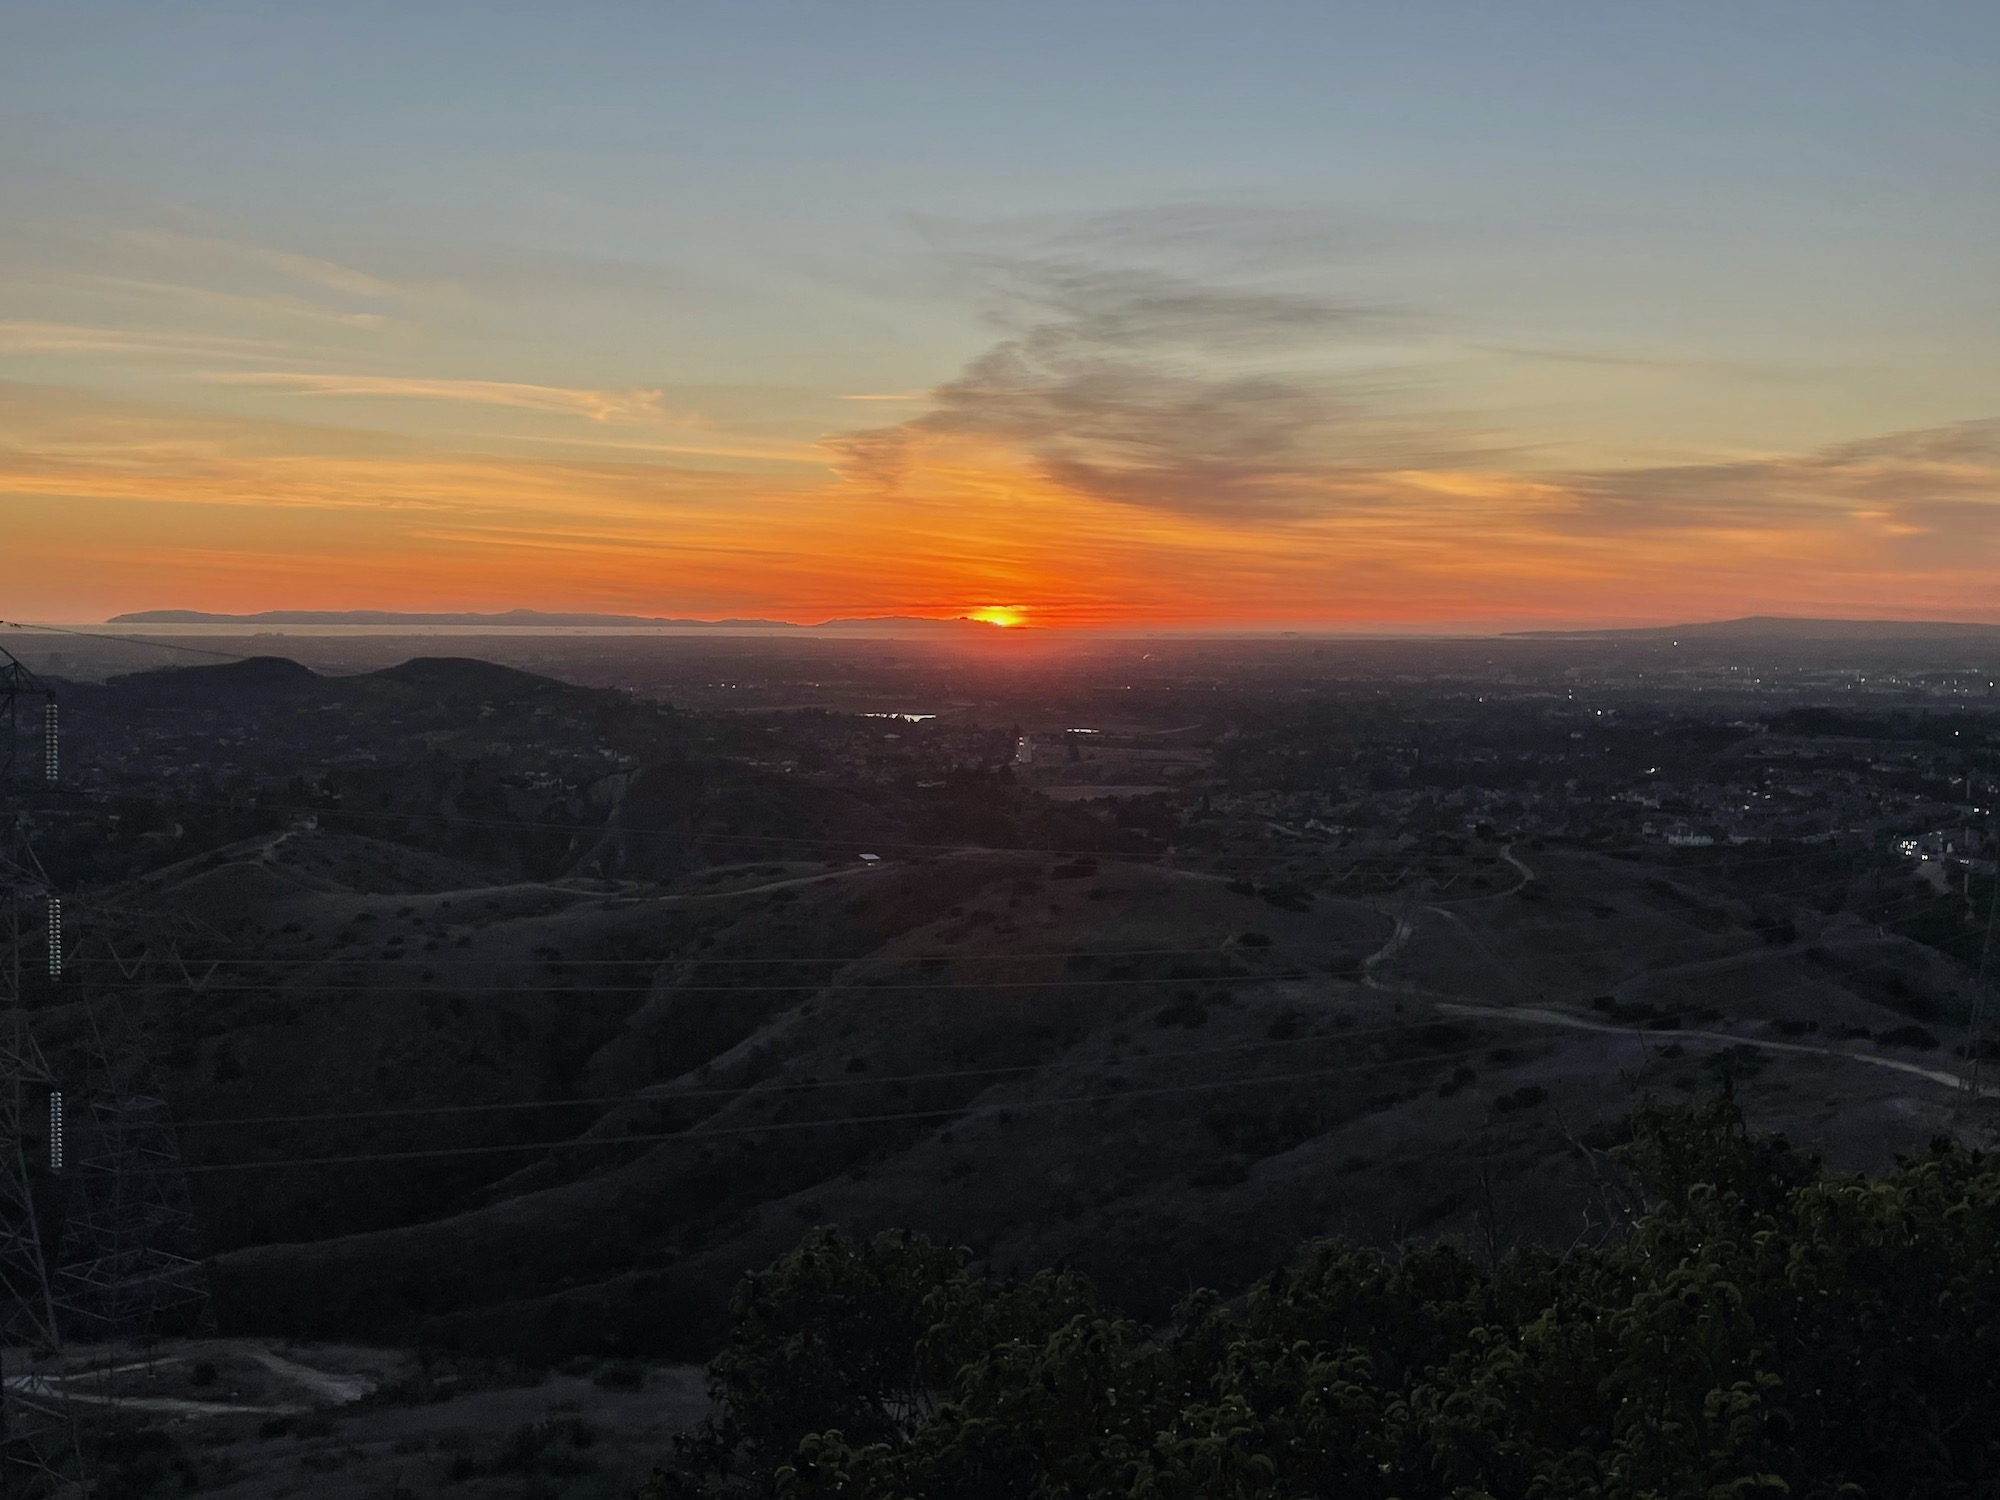 Sunset over pacific ocean - robbers roost vantage point - anaheim hills -4